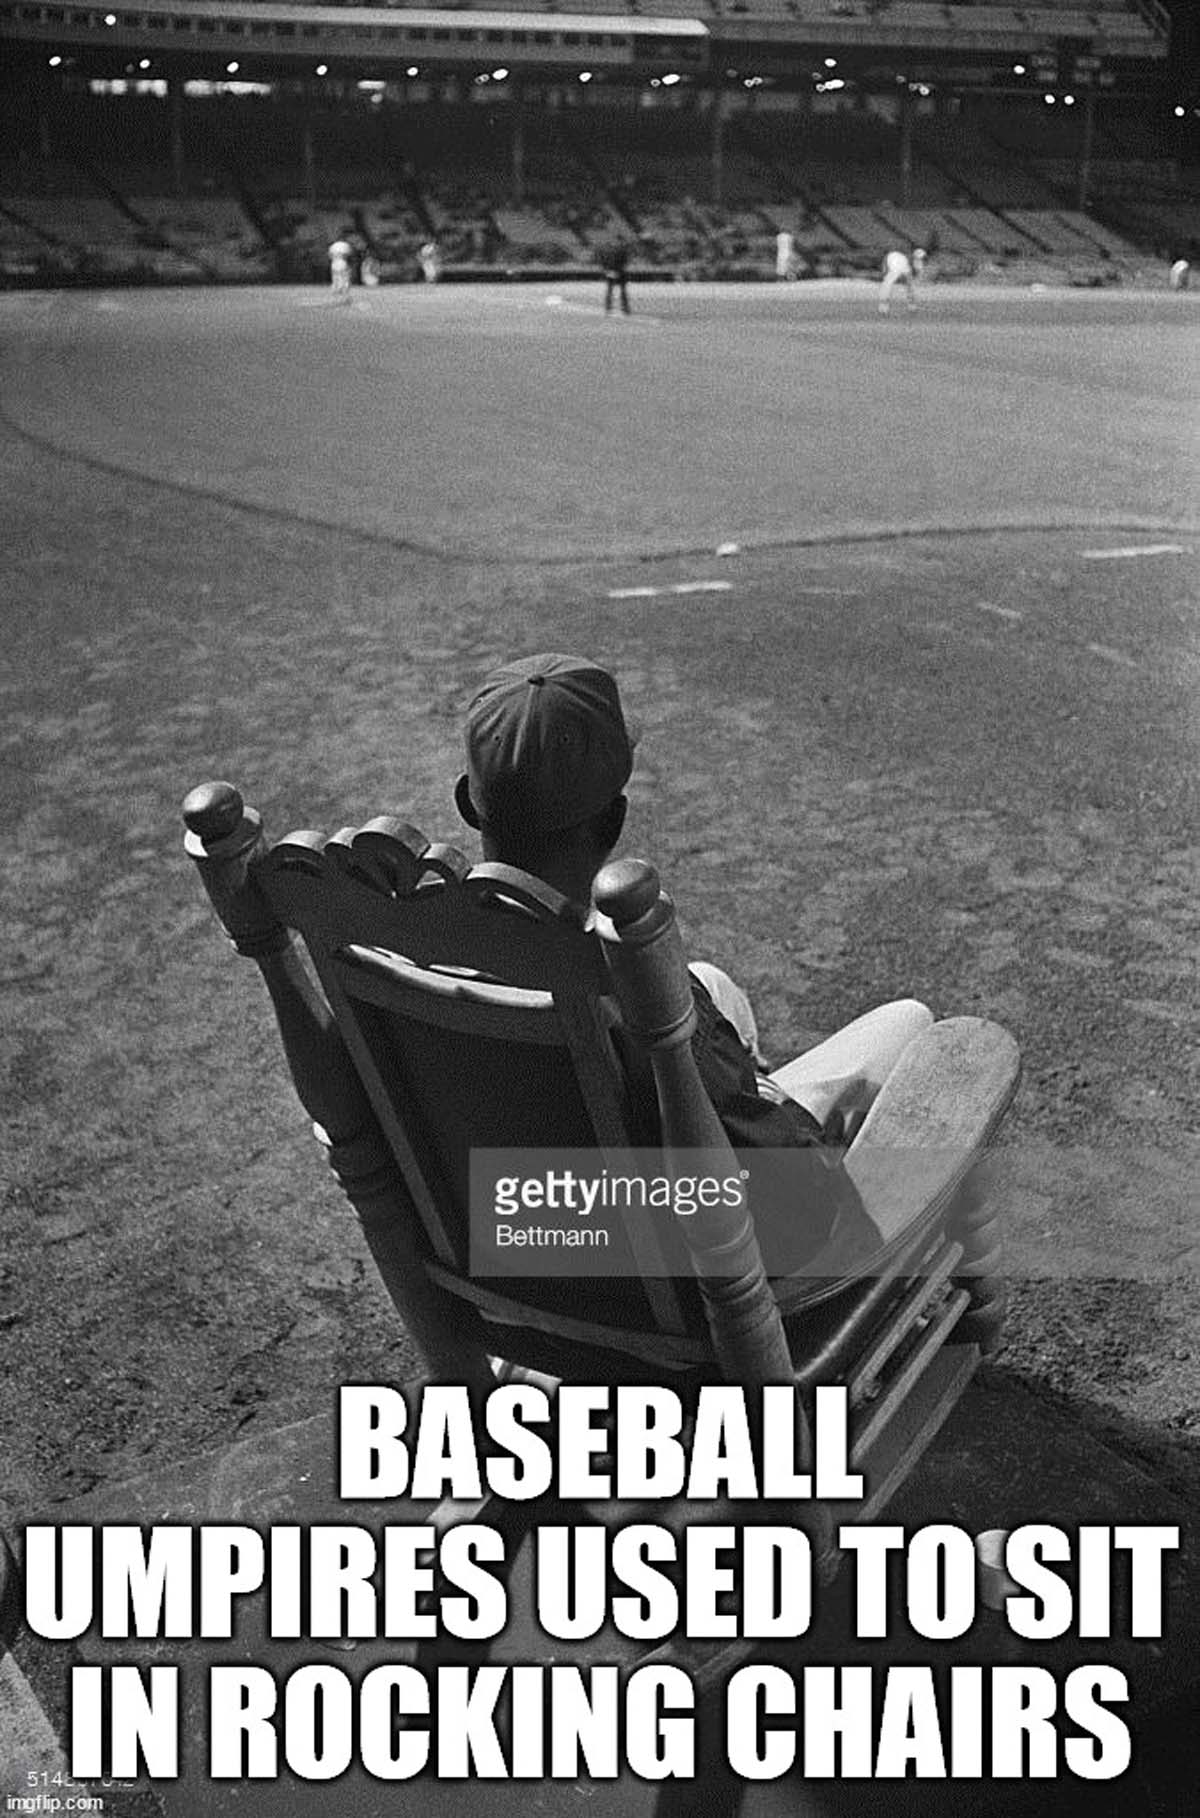 baseball umpire rocking chair - gettyimages Bettmann Baseball Umpires Used To Sit 514 imgflip.com In Rocking Chairs